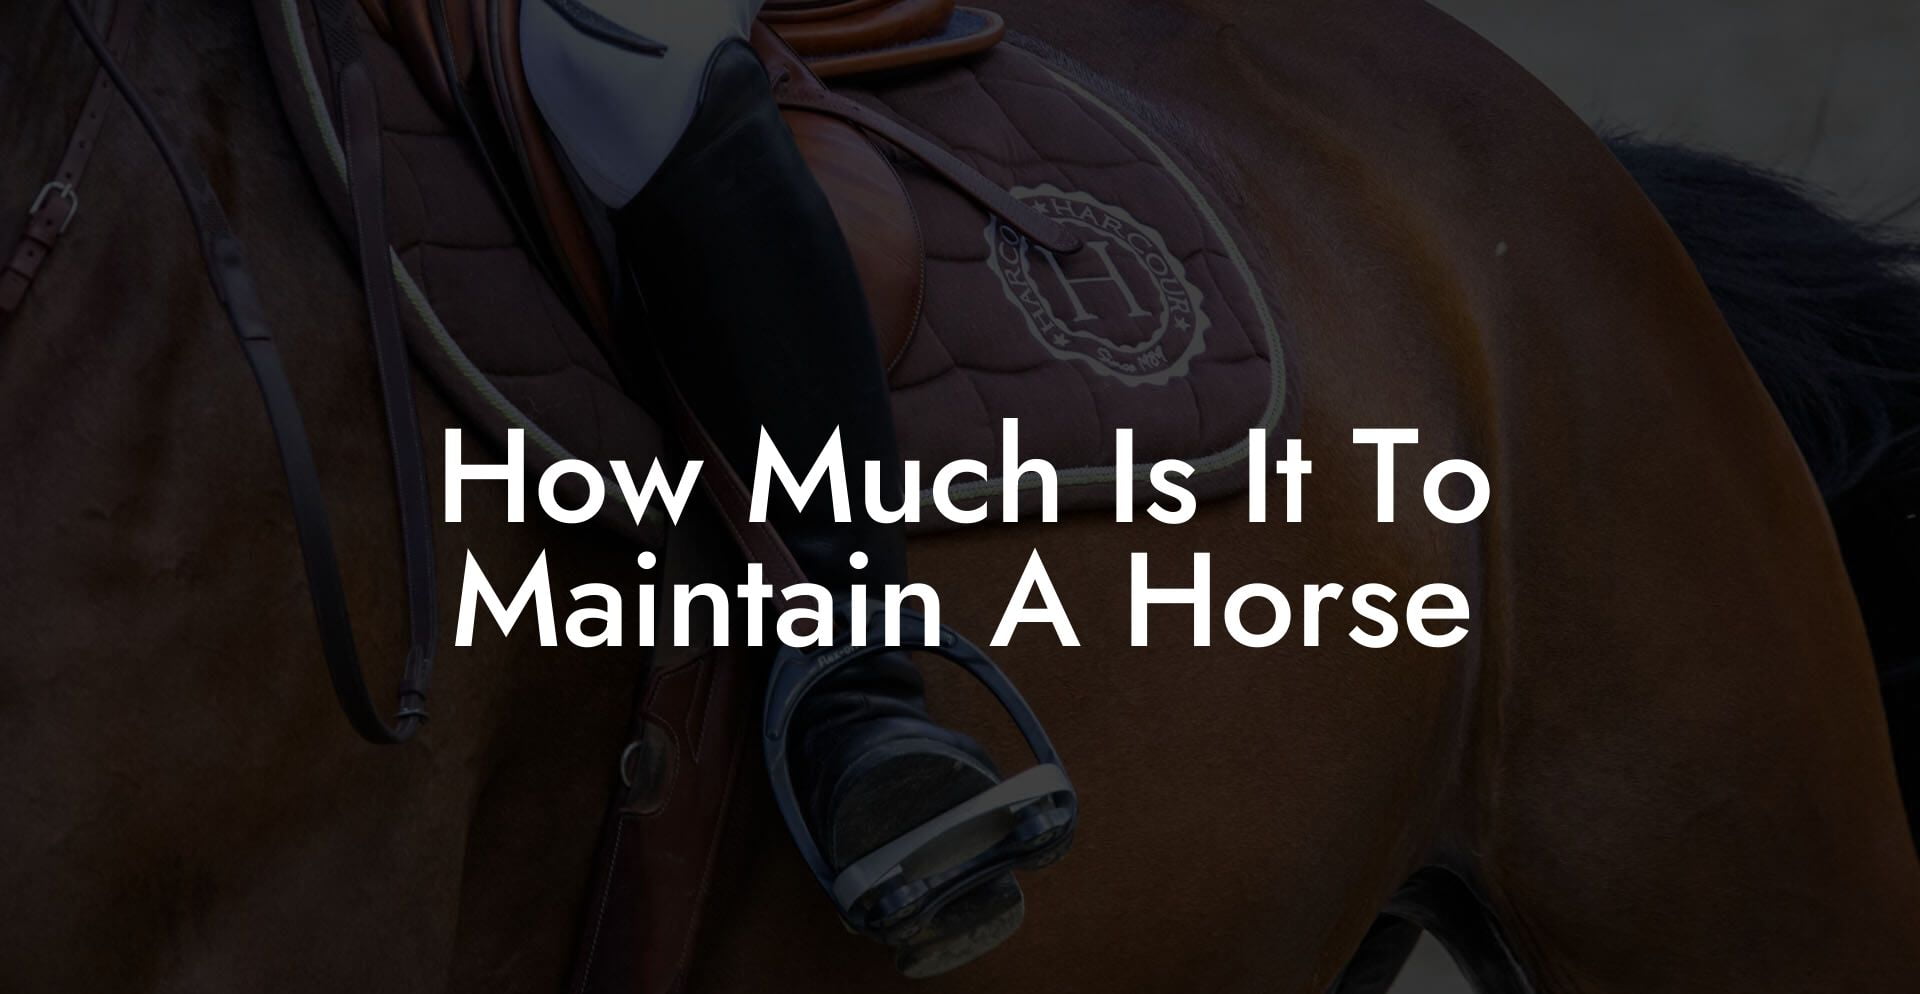 How Much Is It To Maintain A Horse